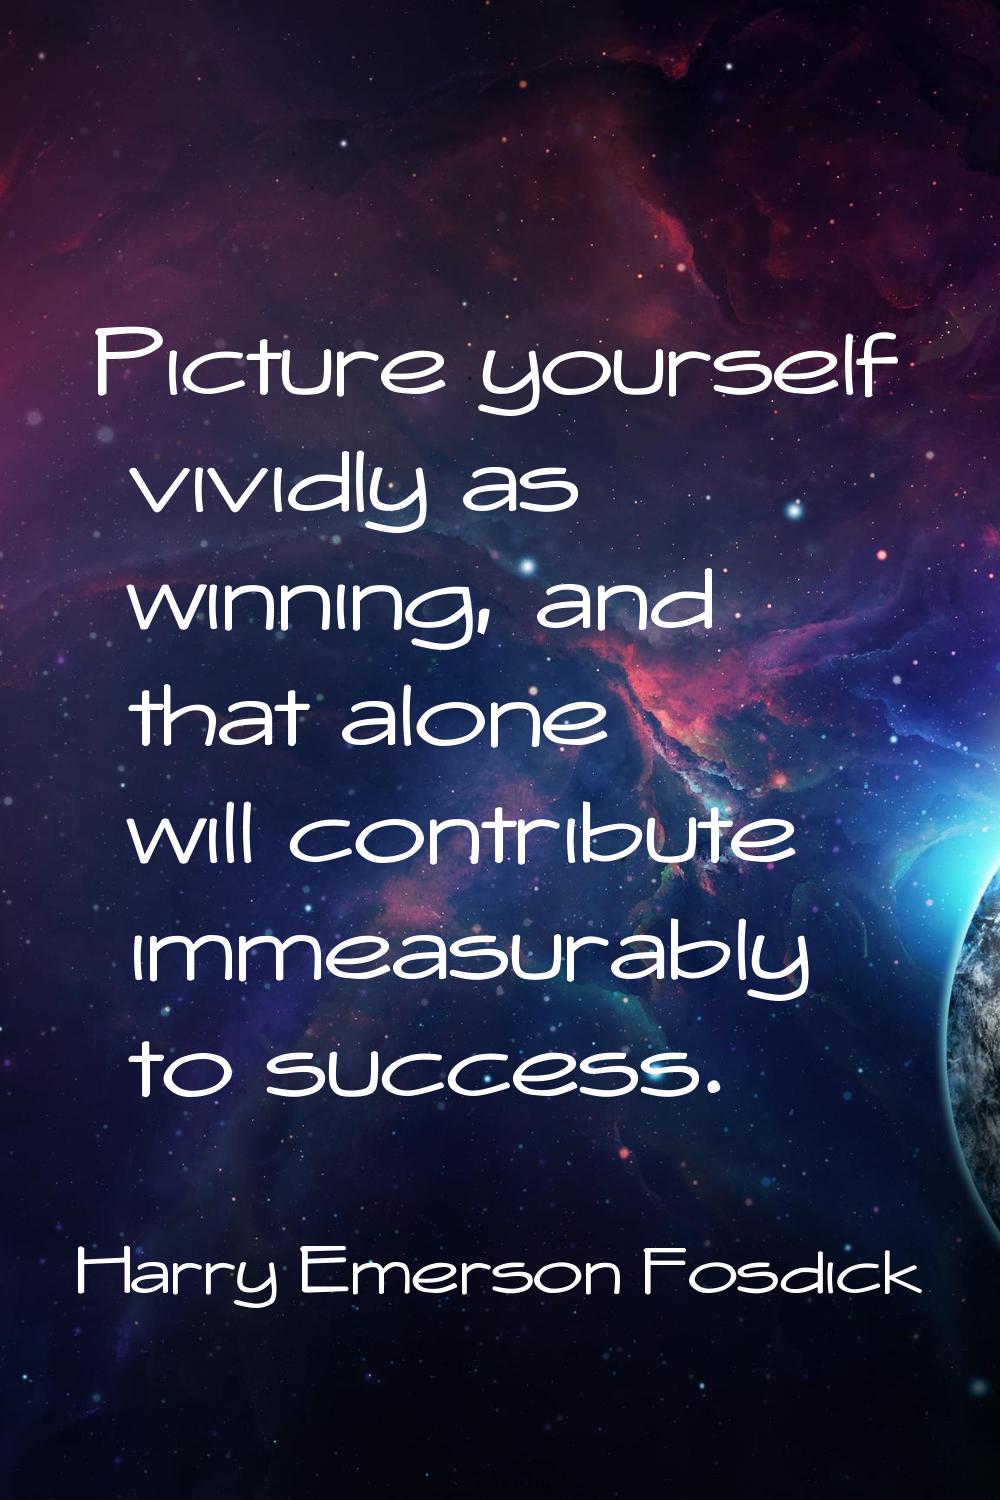 Picture yourself vividly as winning, and that alone will contribute immeasurably to success.